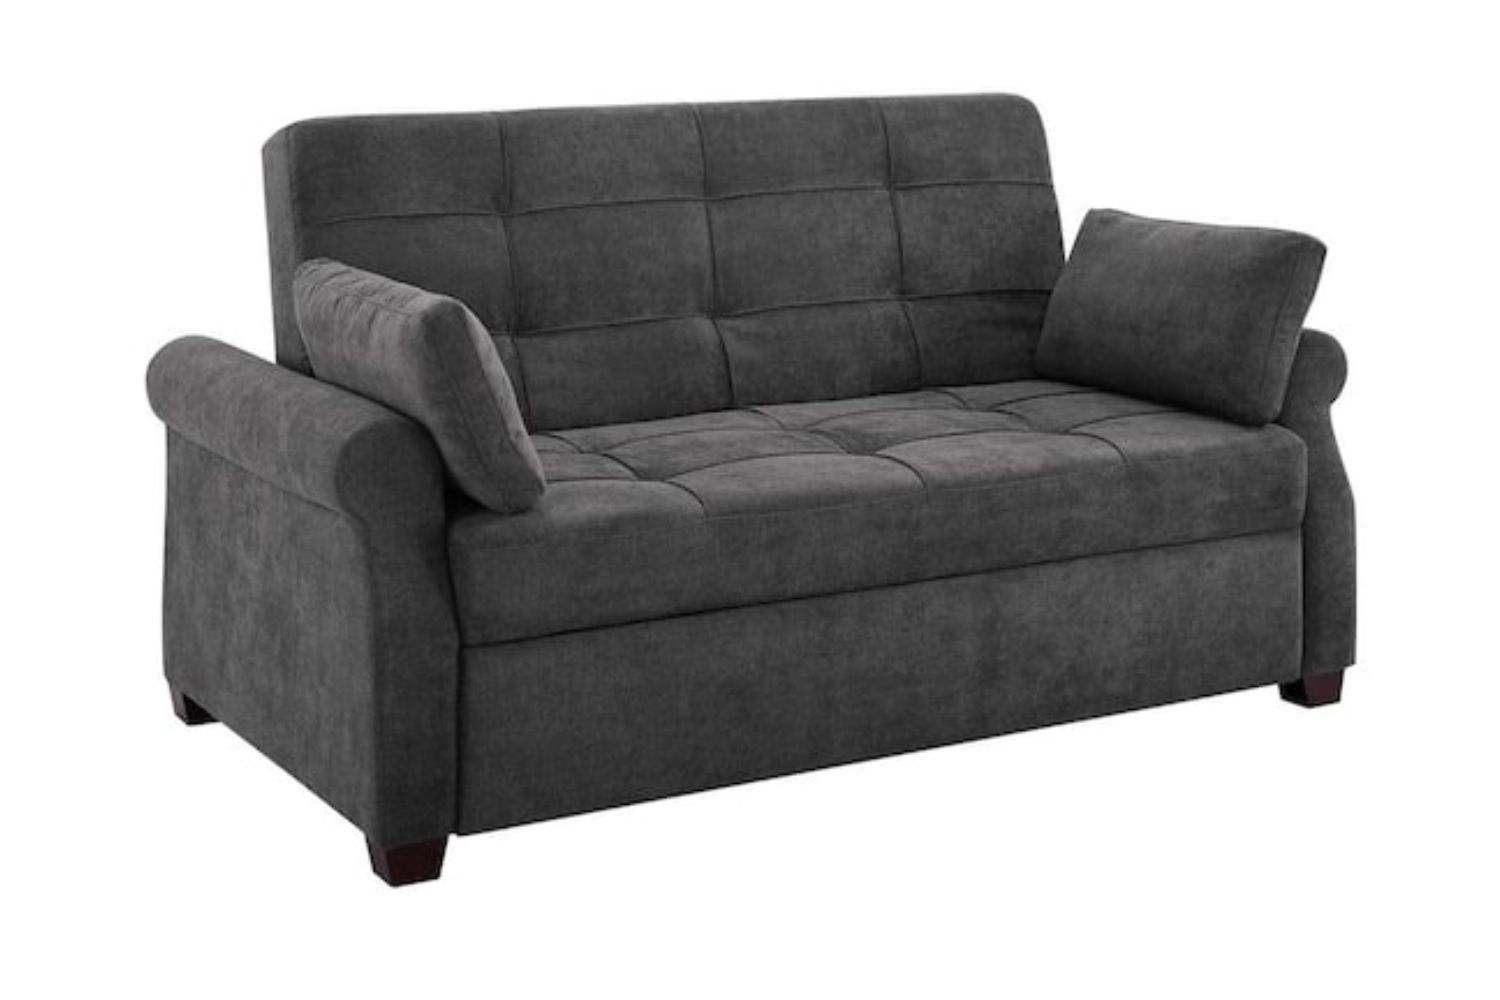 The Best Furniture You Can Find at Home Depot Right Now: Serta Harrington 37.6 in. Grey Polyester 2-Seater Convertible Tuxedo Sofa 